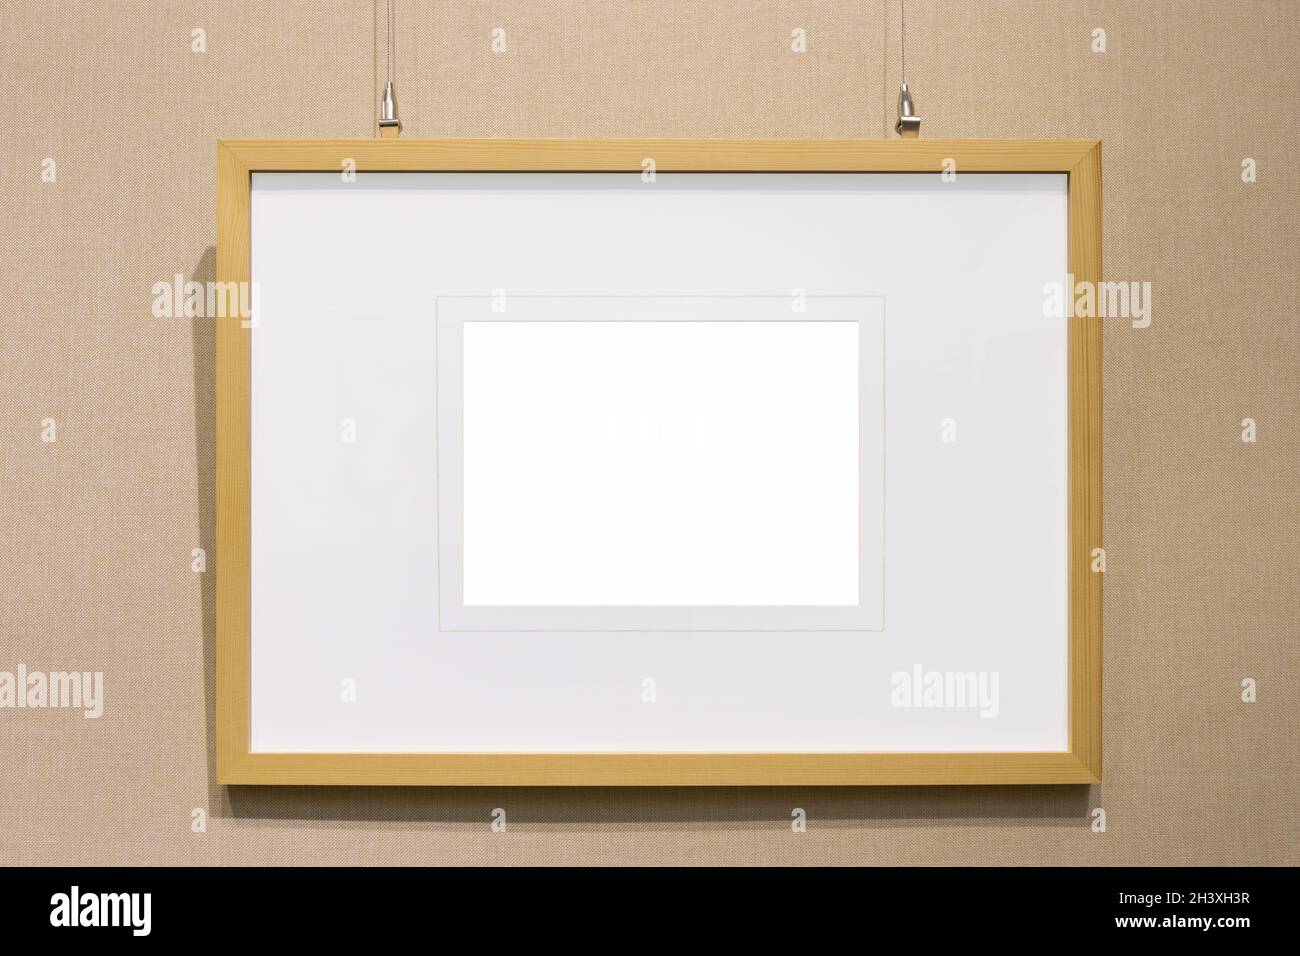 Single picture frame on wall Stock Photo